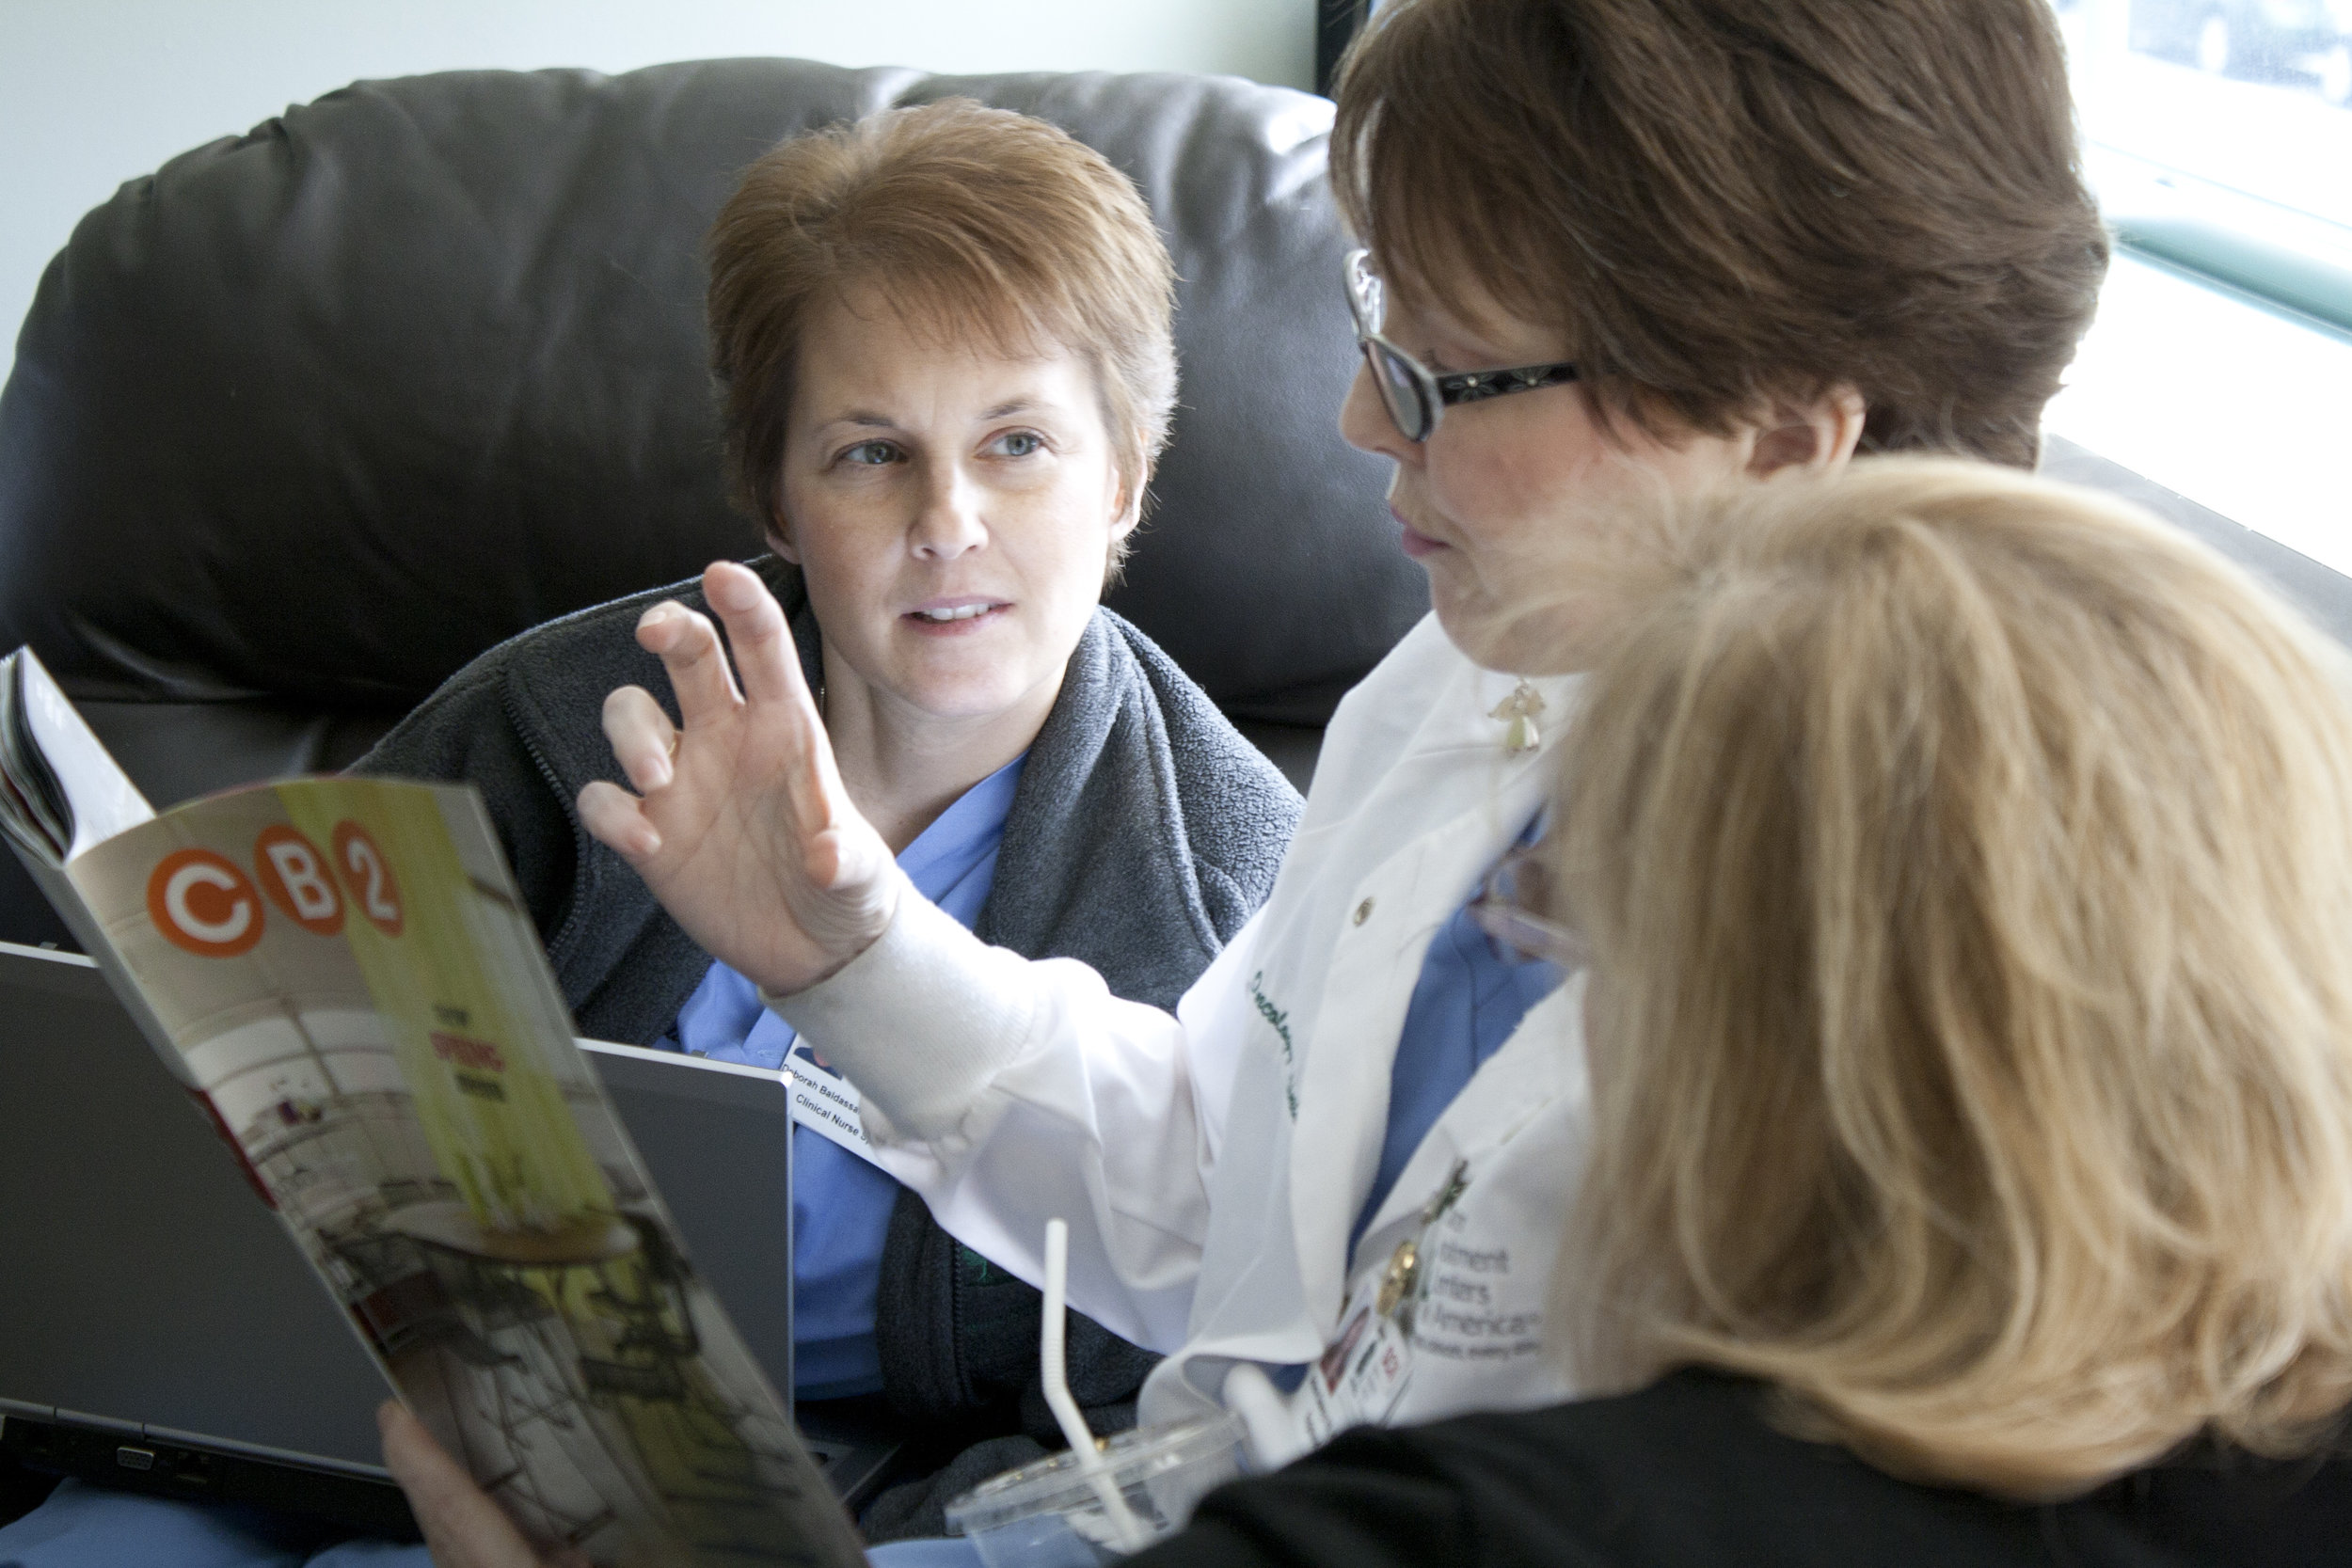 Alt text: a middle-aged white woman with short brown hair and oval, thick-rimmed glasses sits between two other young women who are looking at her as she reads from a magazine in her hands.